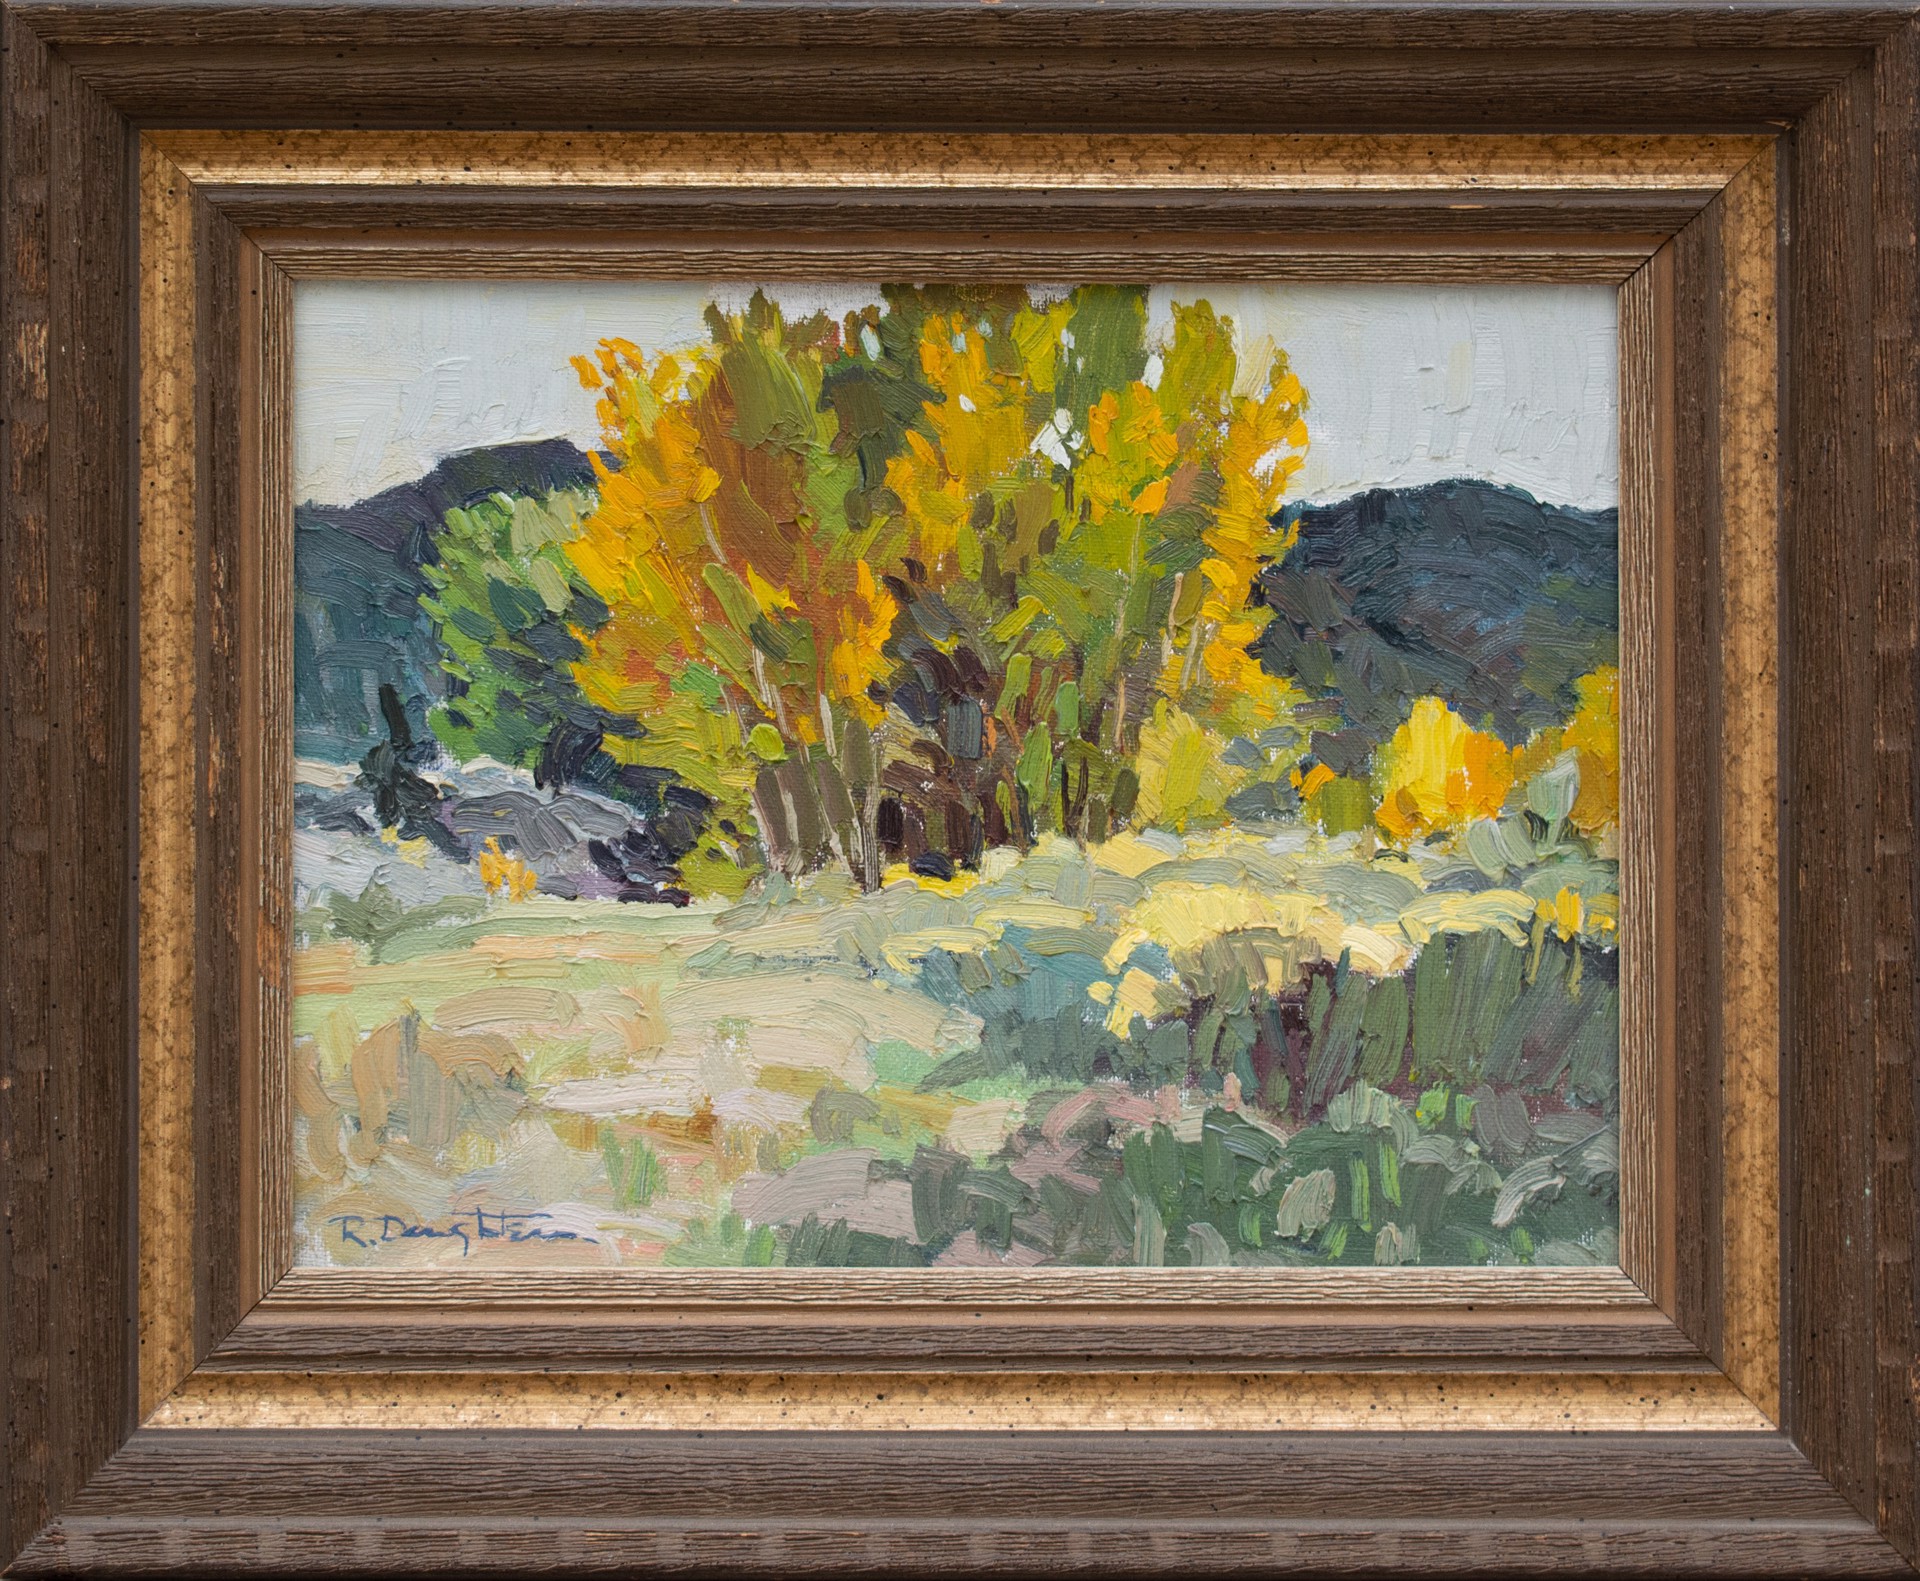 Fall in Canyon by Robert Daughters (1929-2013)